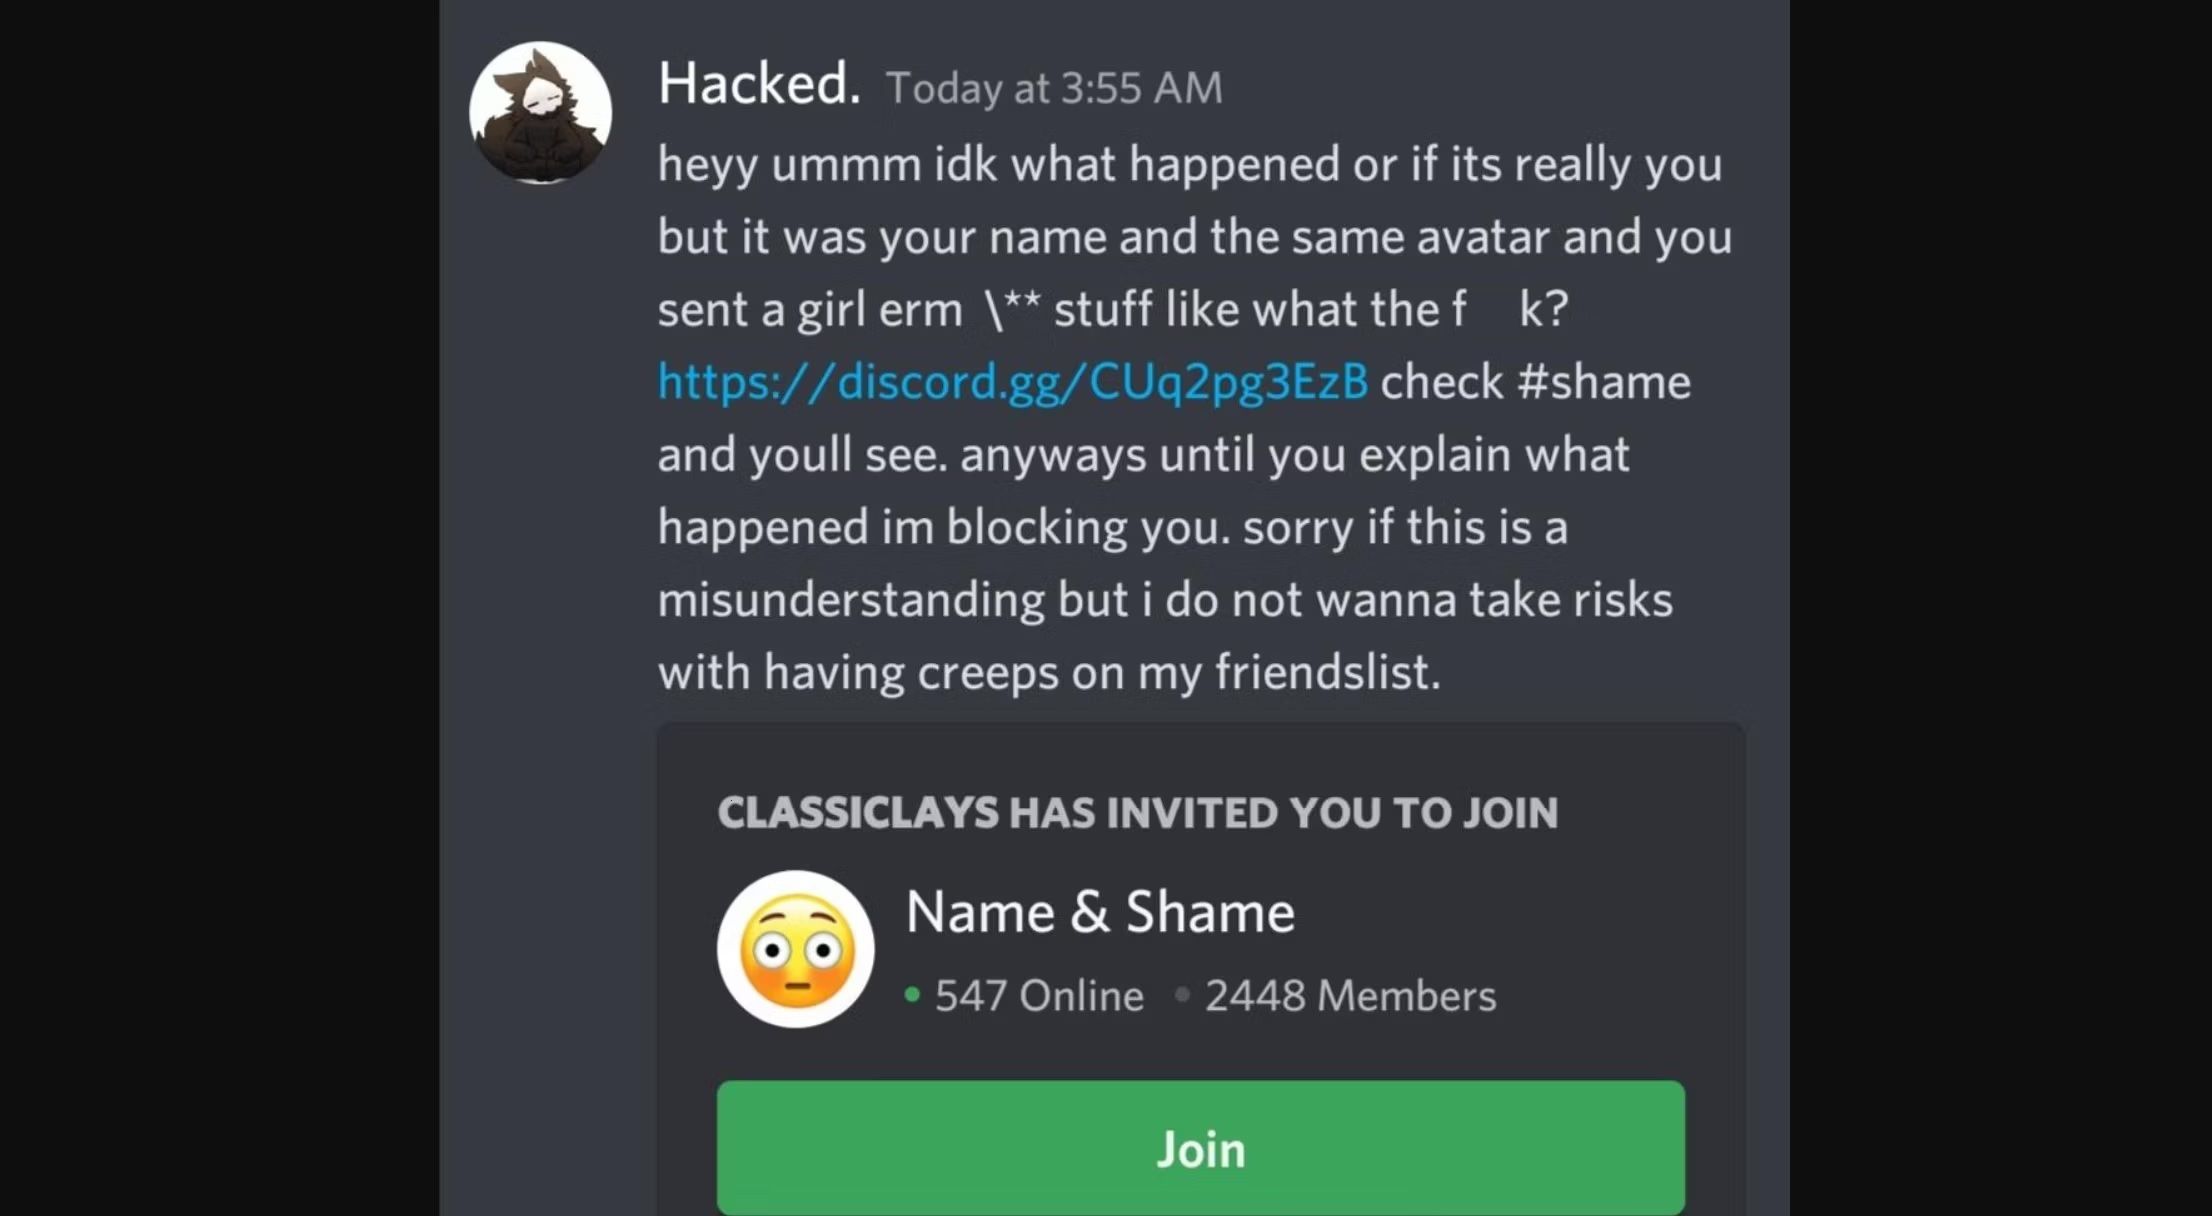 spotting scam message on discord voip